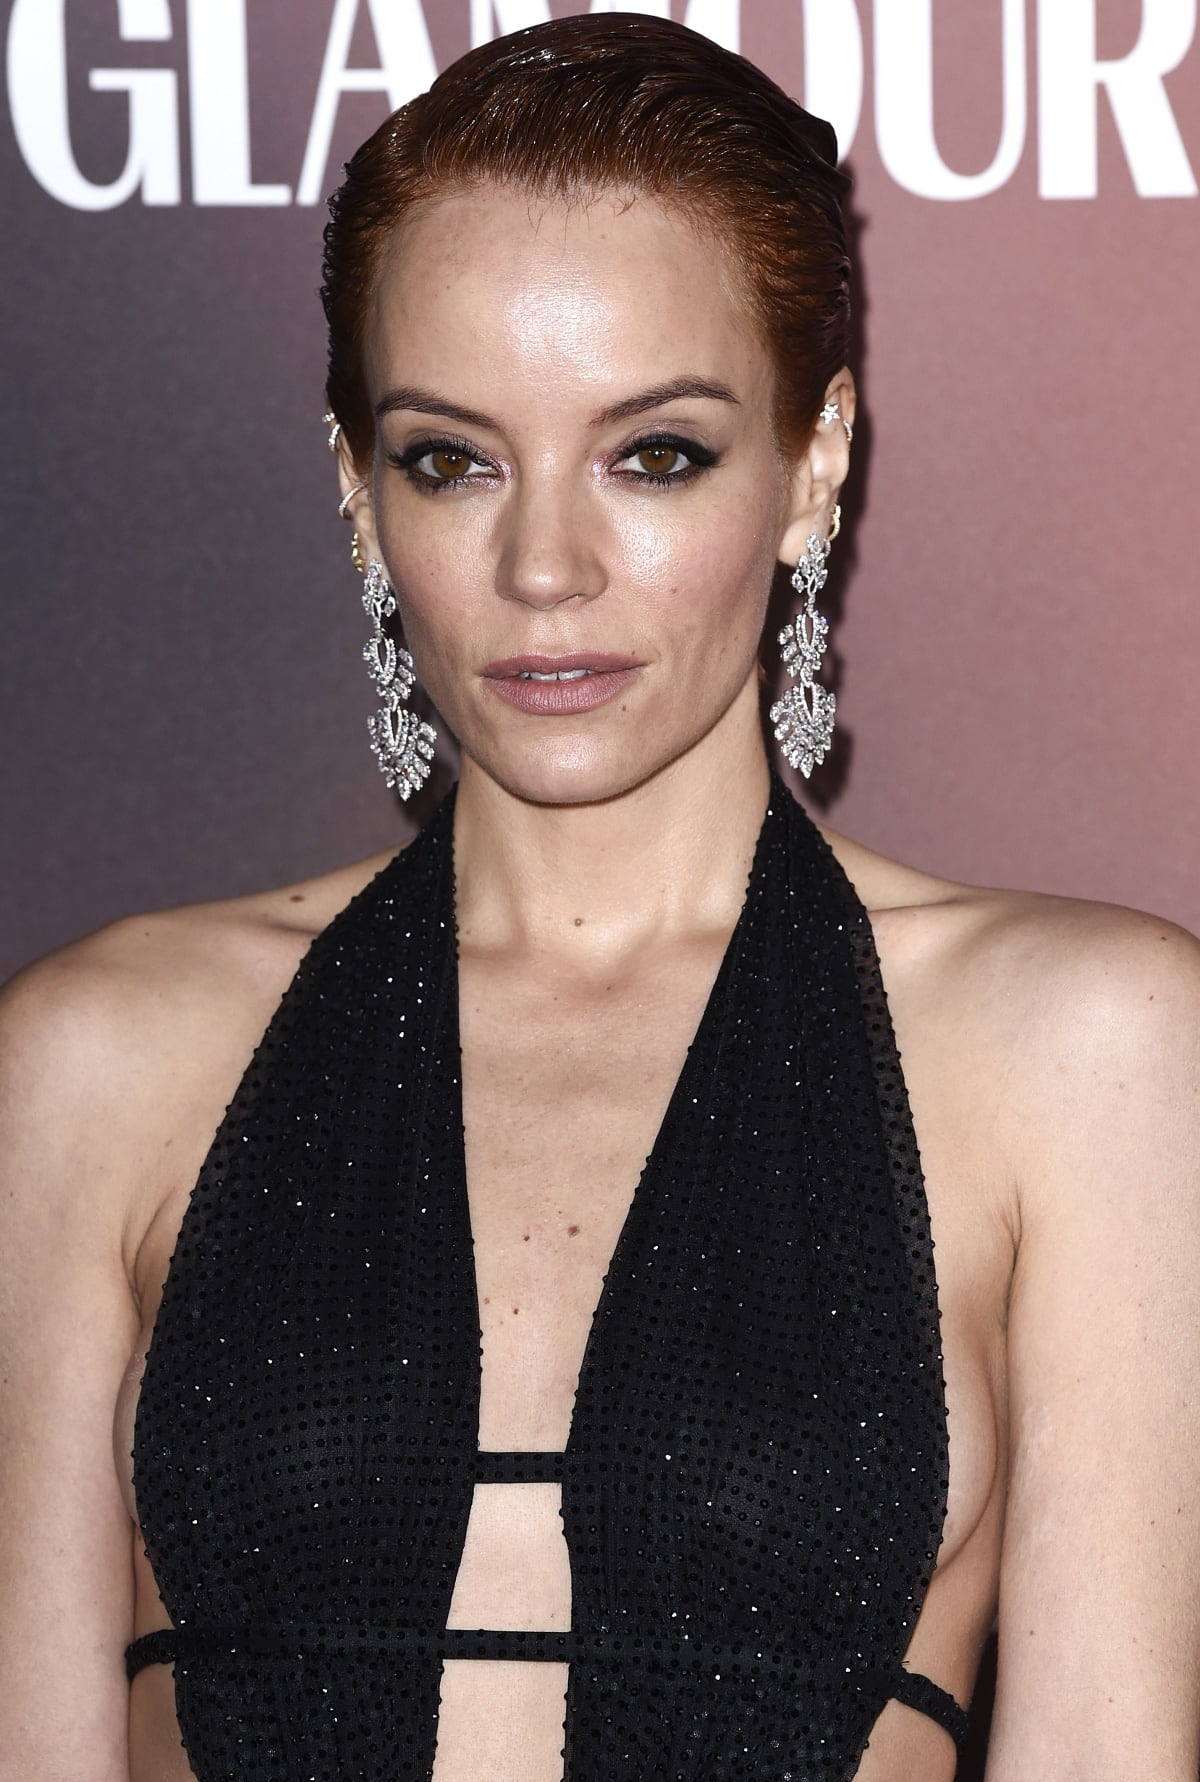 Lily Allen’s beauty look consisted of subtle makeup, a slicked-back wet-look hairstyle, and Messika jewels